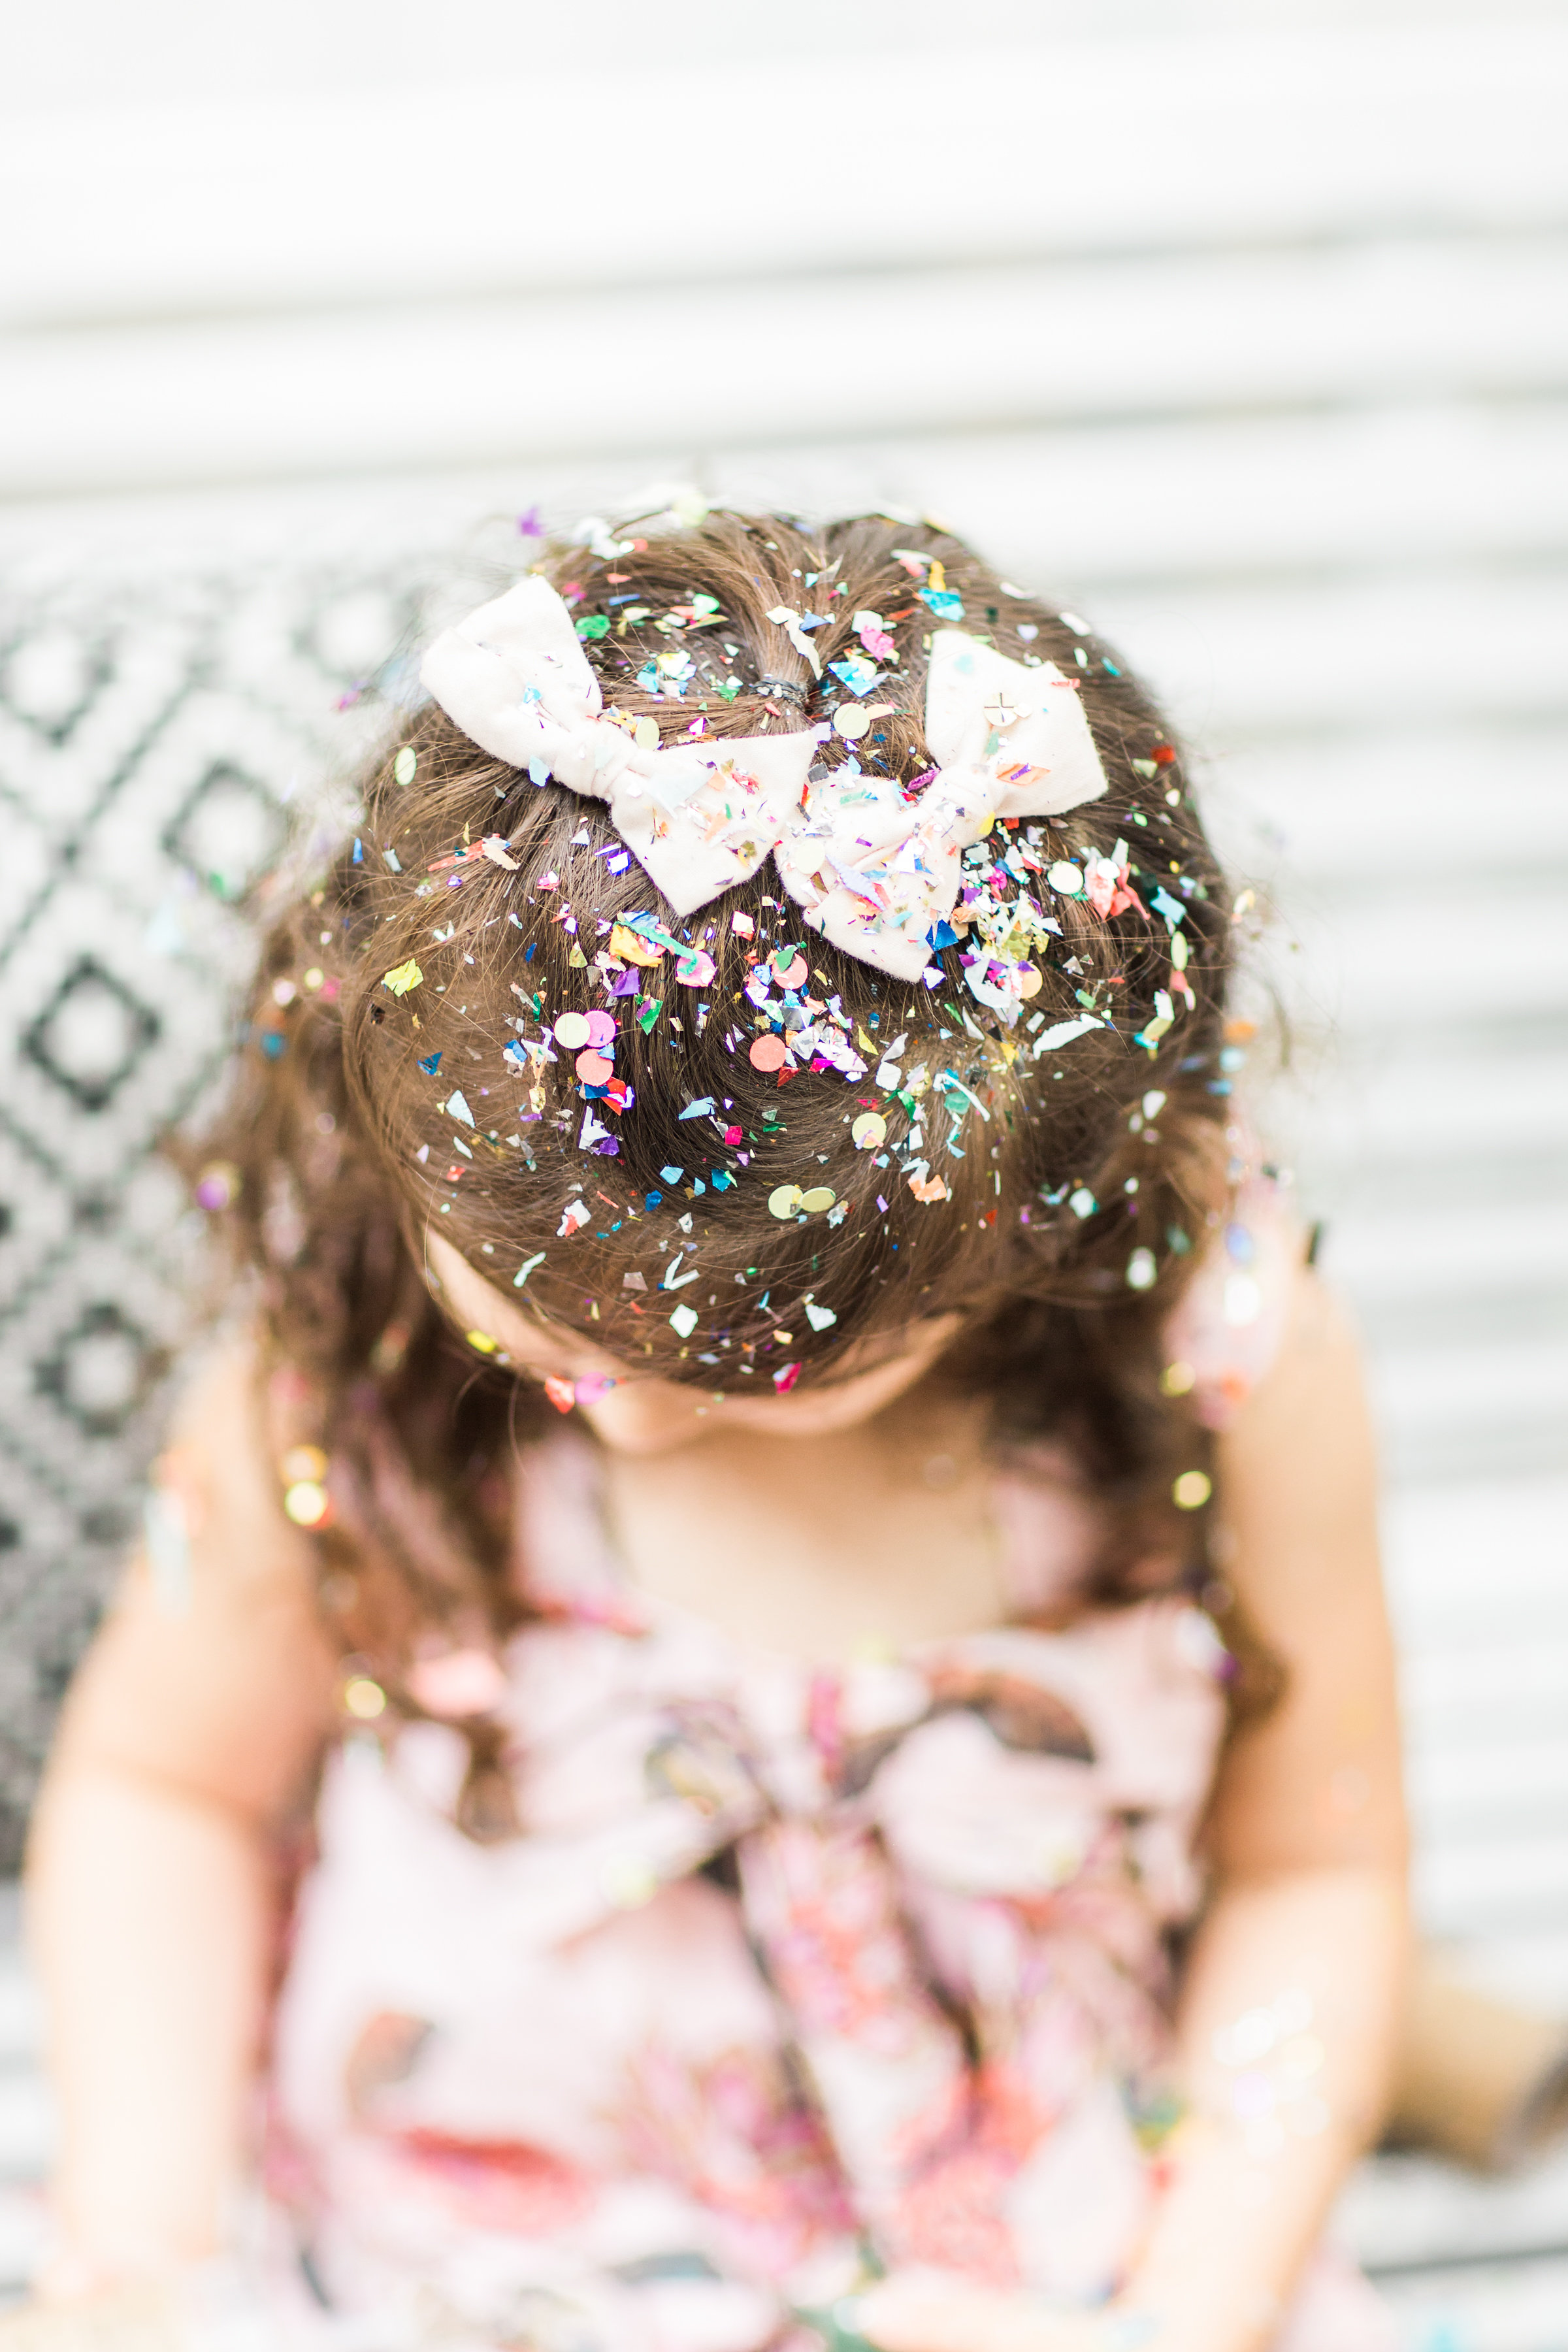 Behind-the-scenes of a magical, whimsical little girl's mermaid birthday party, complete with mermaid dessert bar, games, prizes, and crafts. Click through for the details. | glitterinc.com | @glitterinc